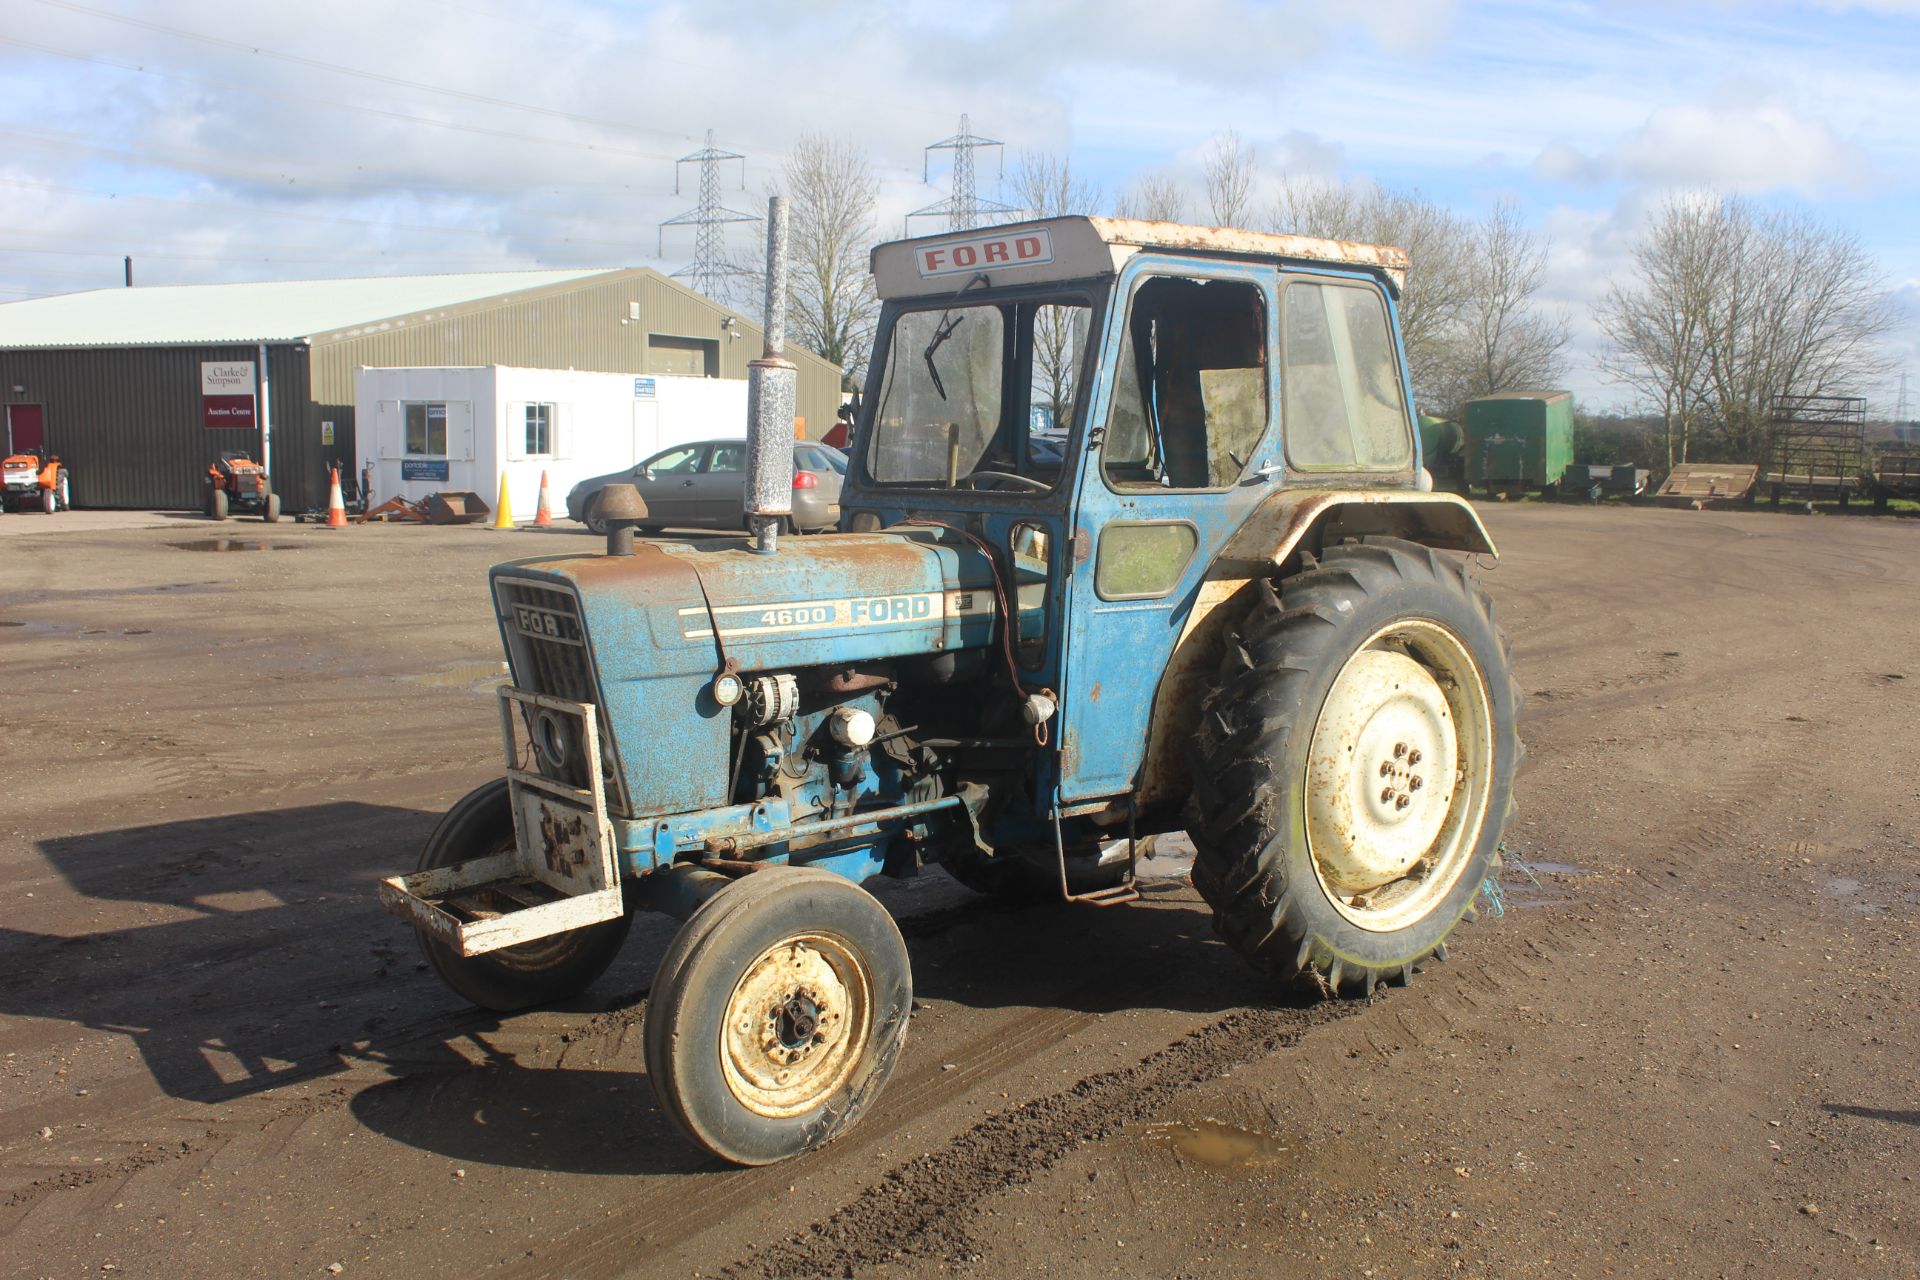 Ford 4600 2WD tractor. Registration MPV 963P. Date of first registration 01/03/1976. Serial number